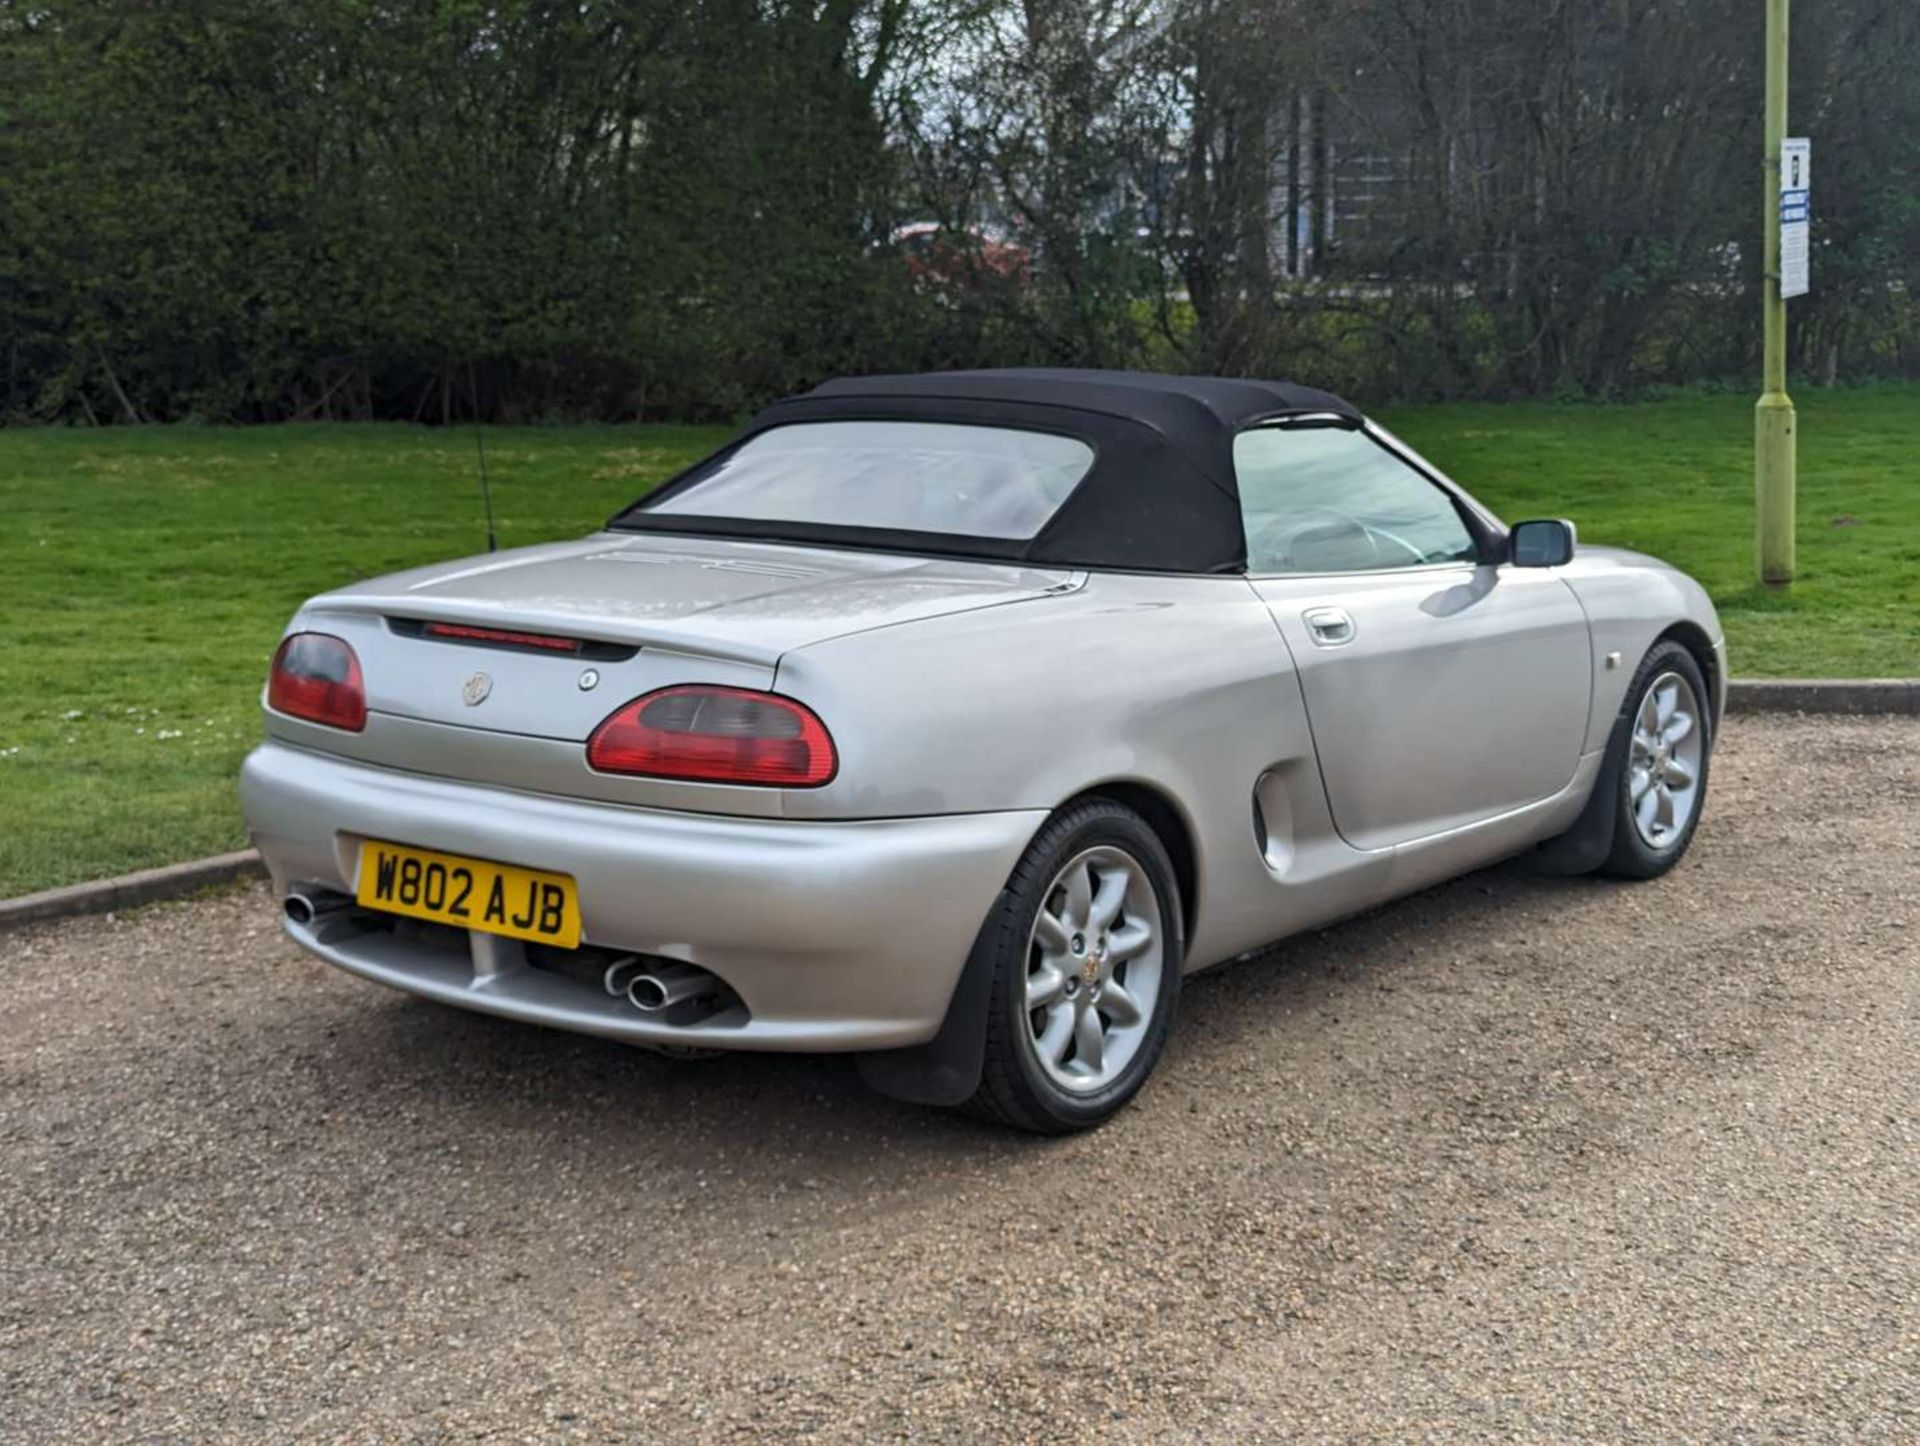 2000 MGF 1.8I VVC - Image 7 of 25